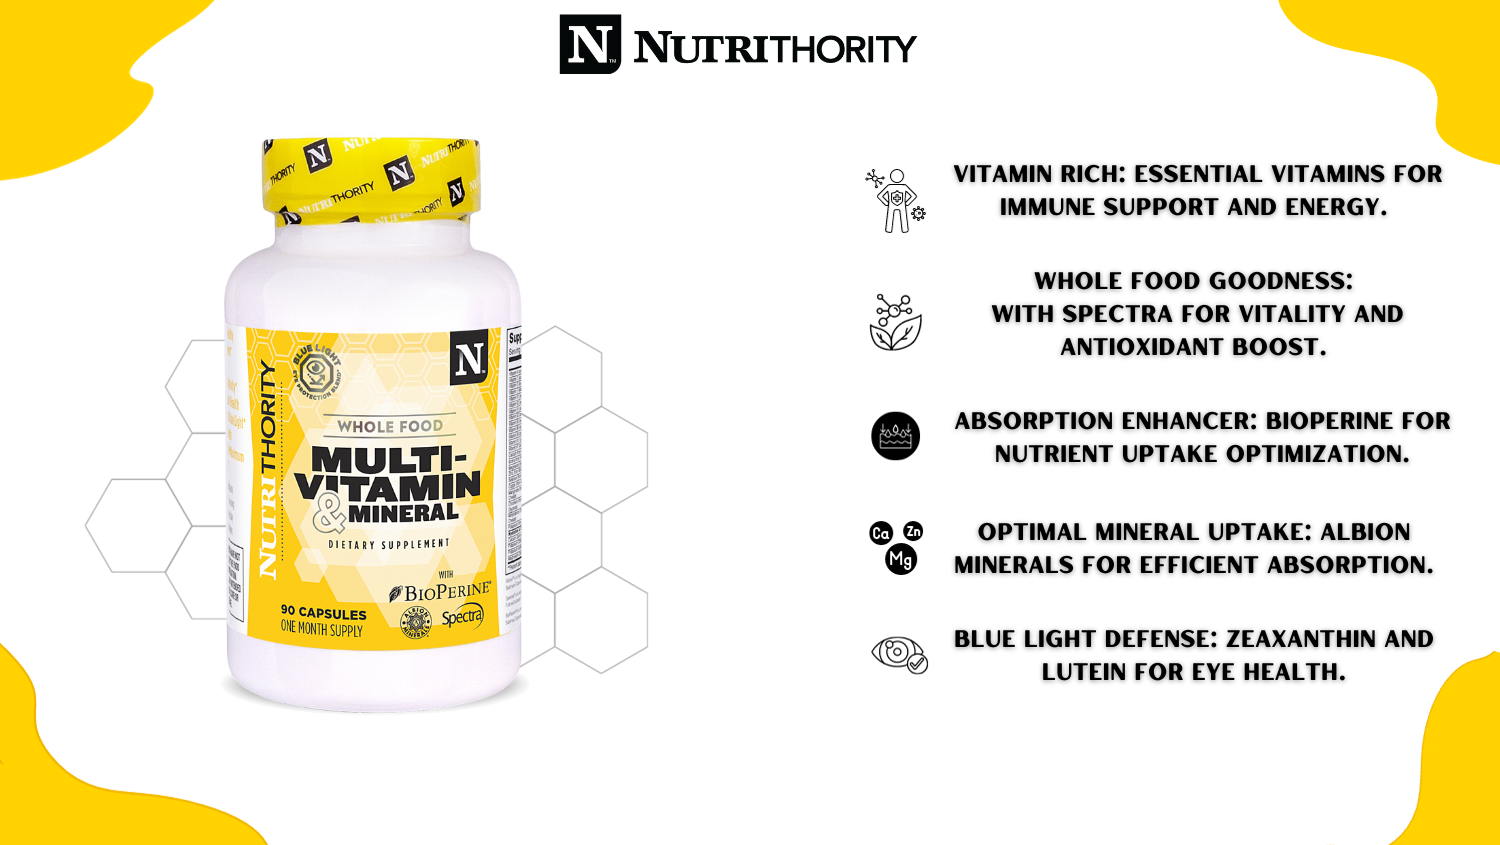 Nutrithority Whole Food Multivitamin and Mineral